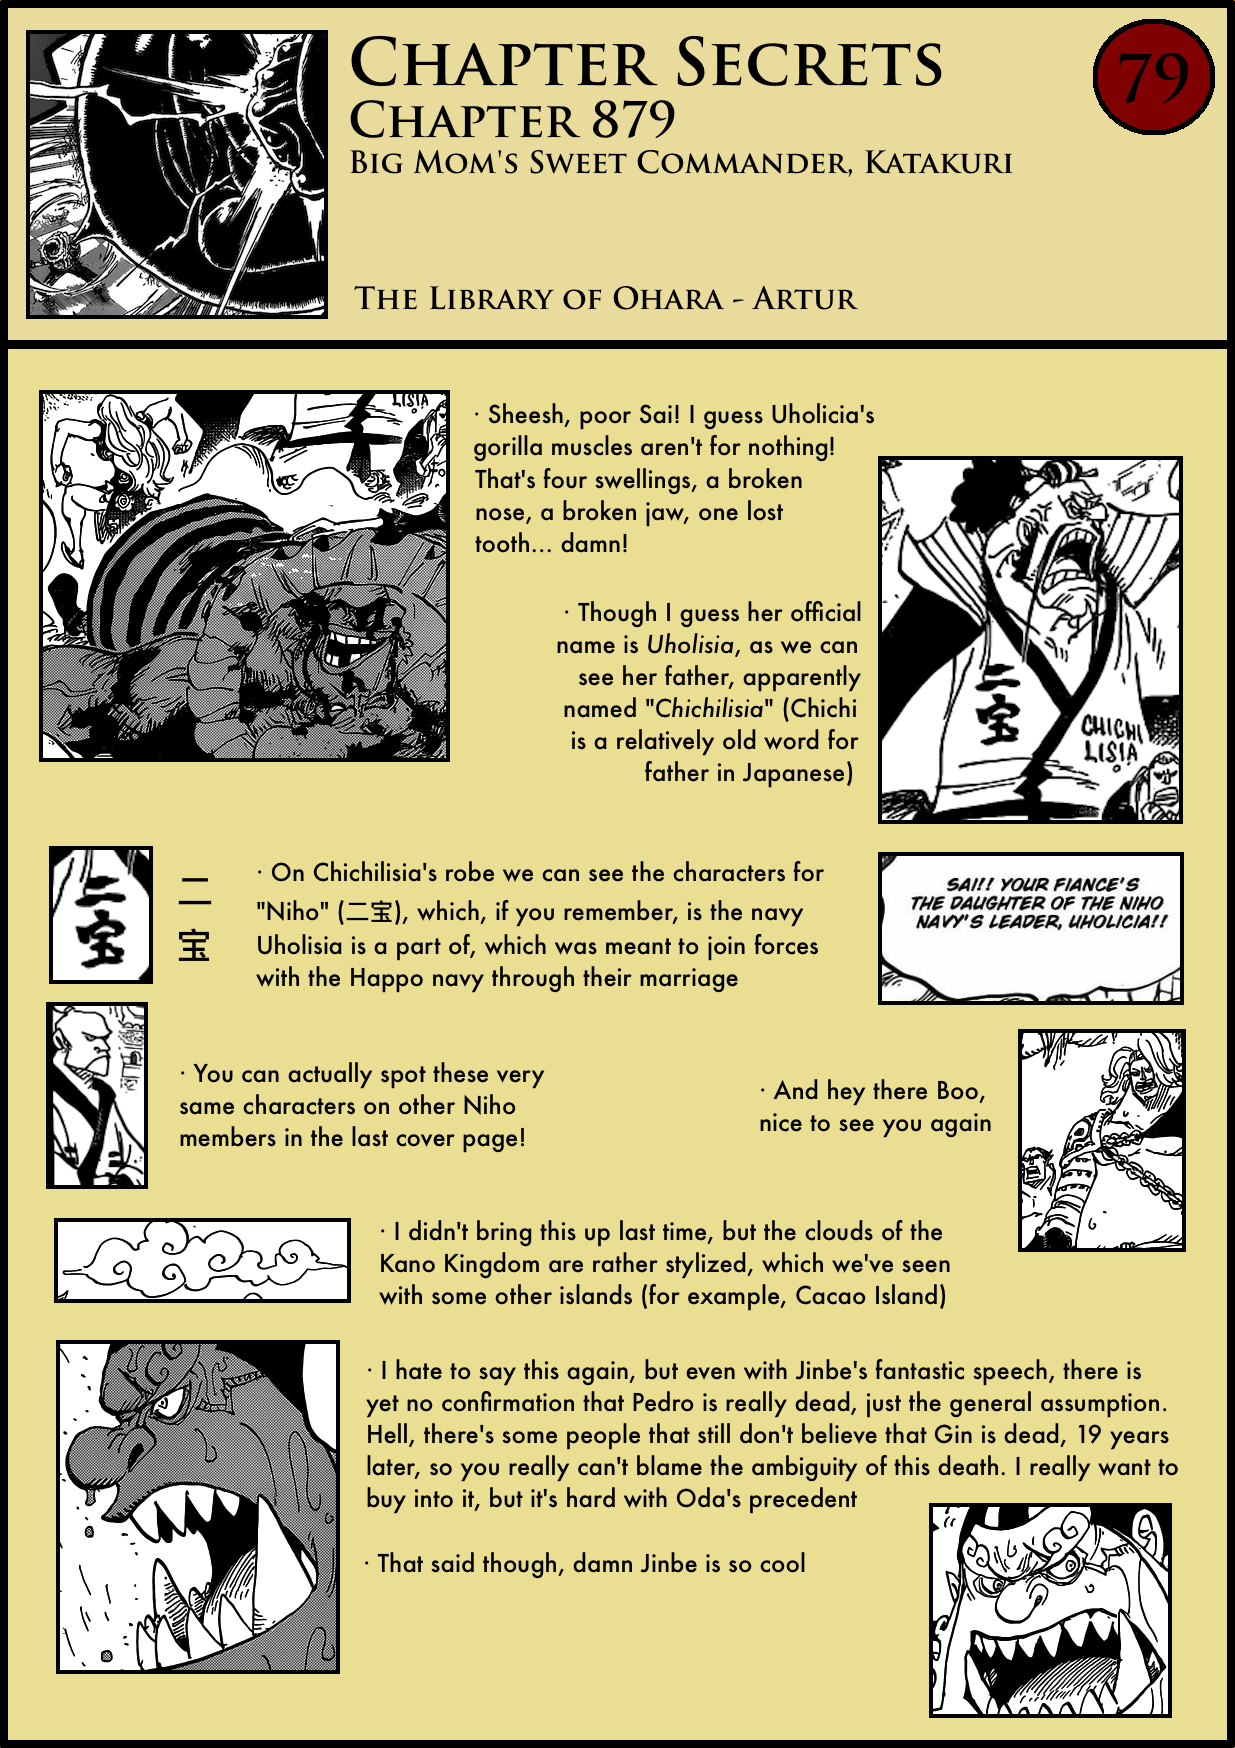 Chapter Secrets 79 Chapter 879 The Library Of Ohara